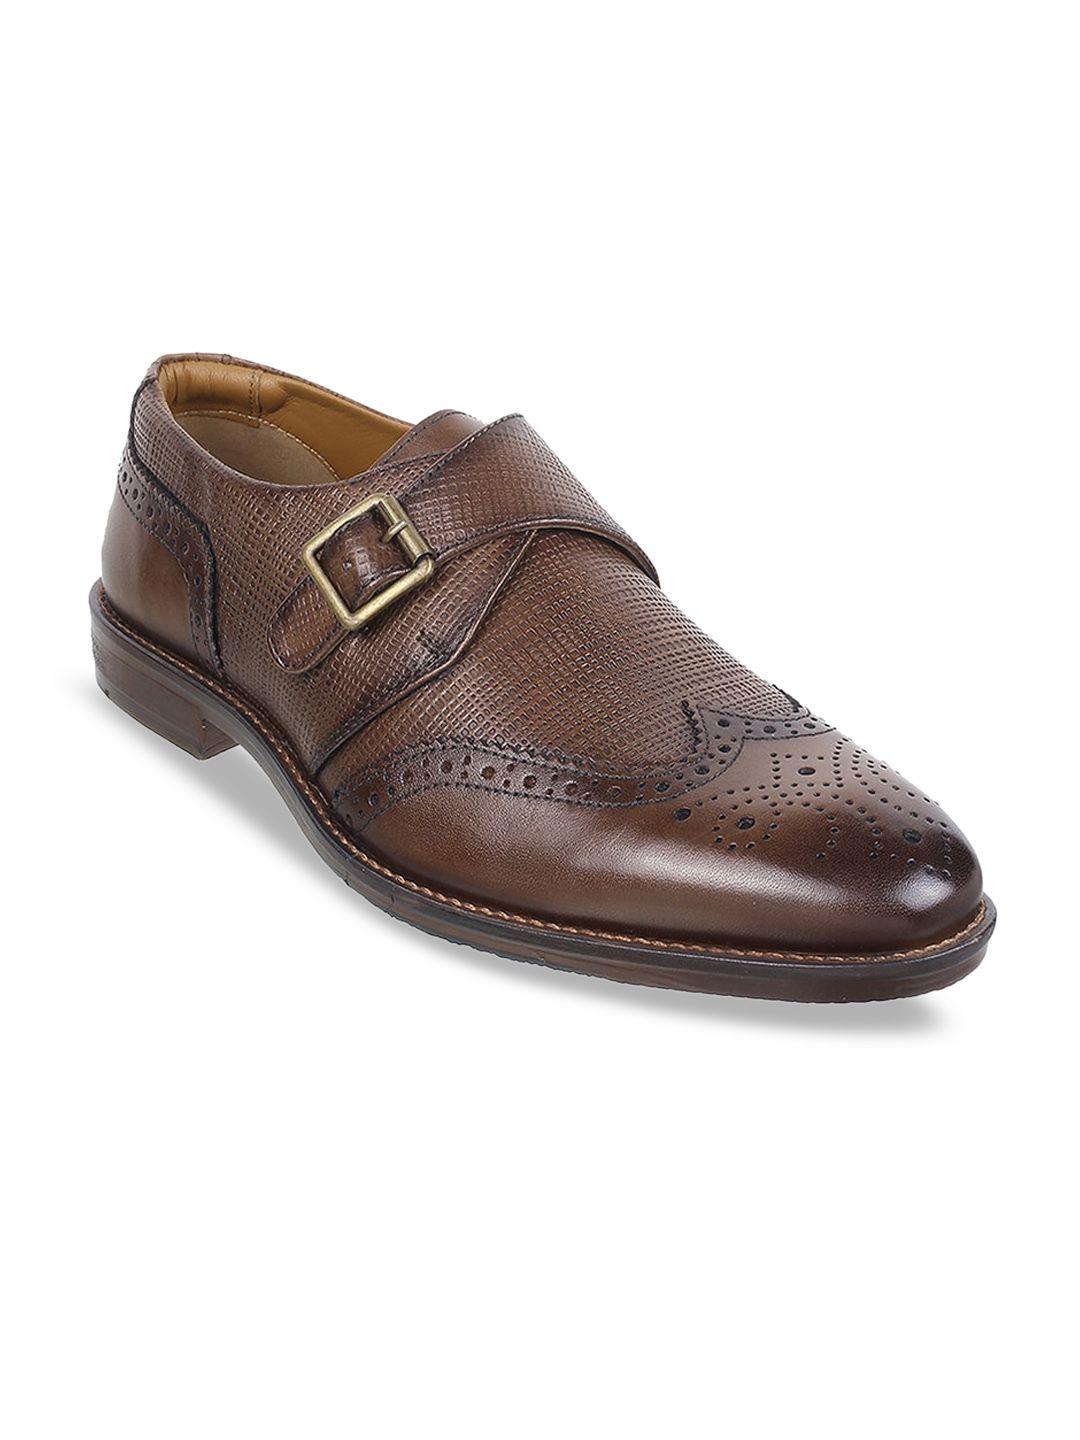 j.fontini men perforated leather formal monk shoes